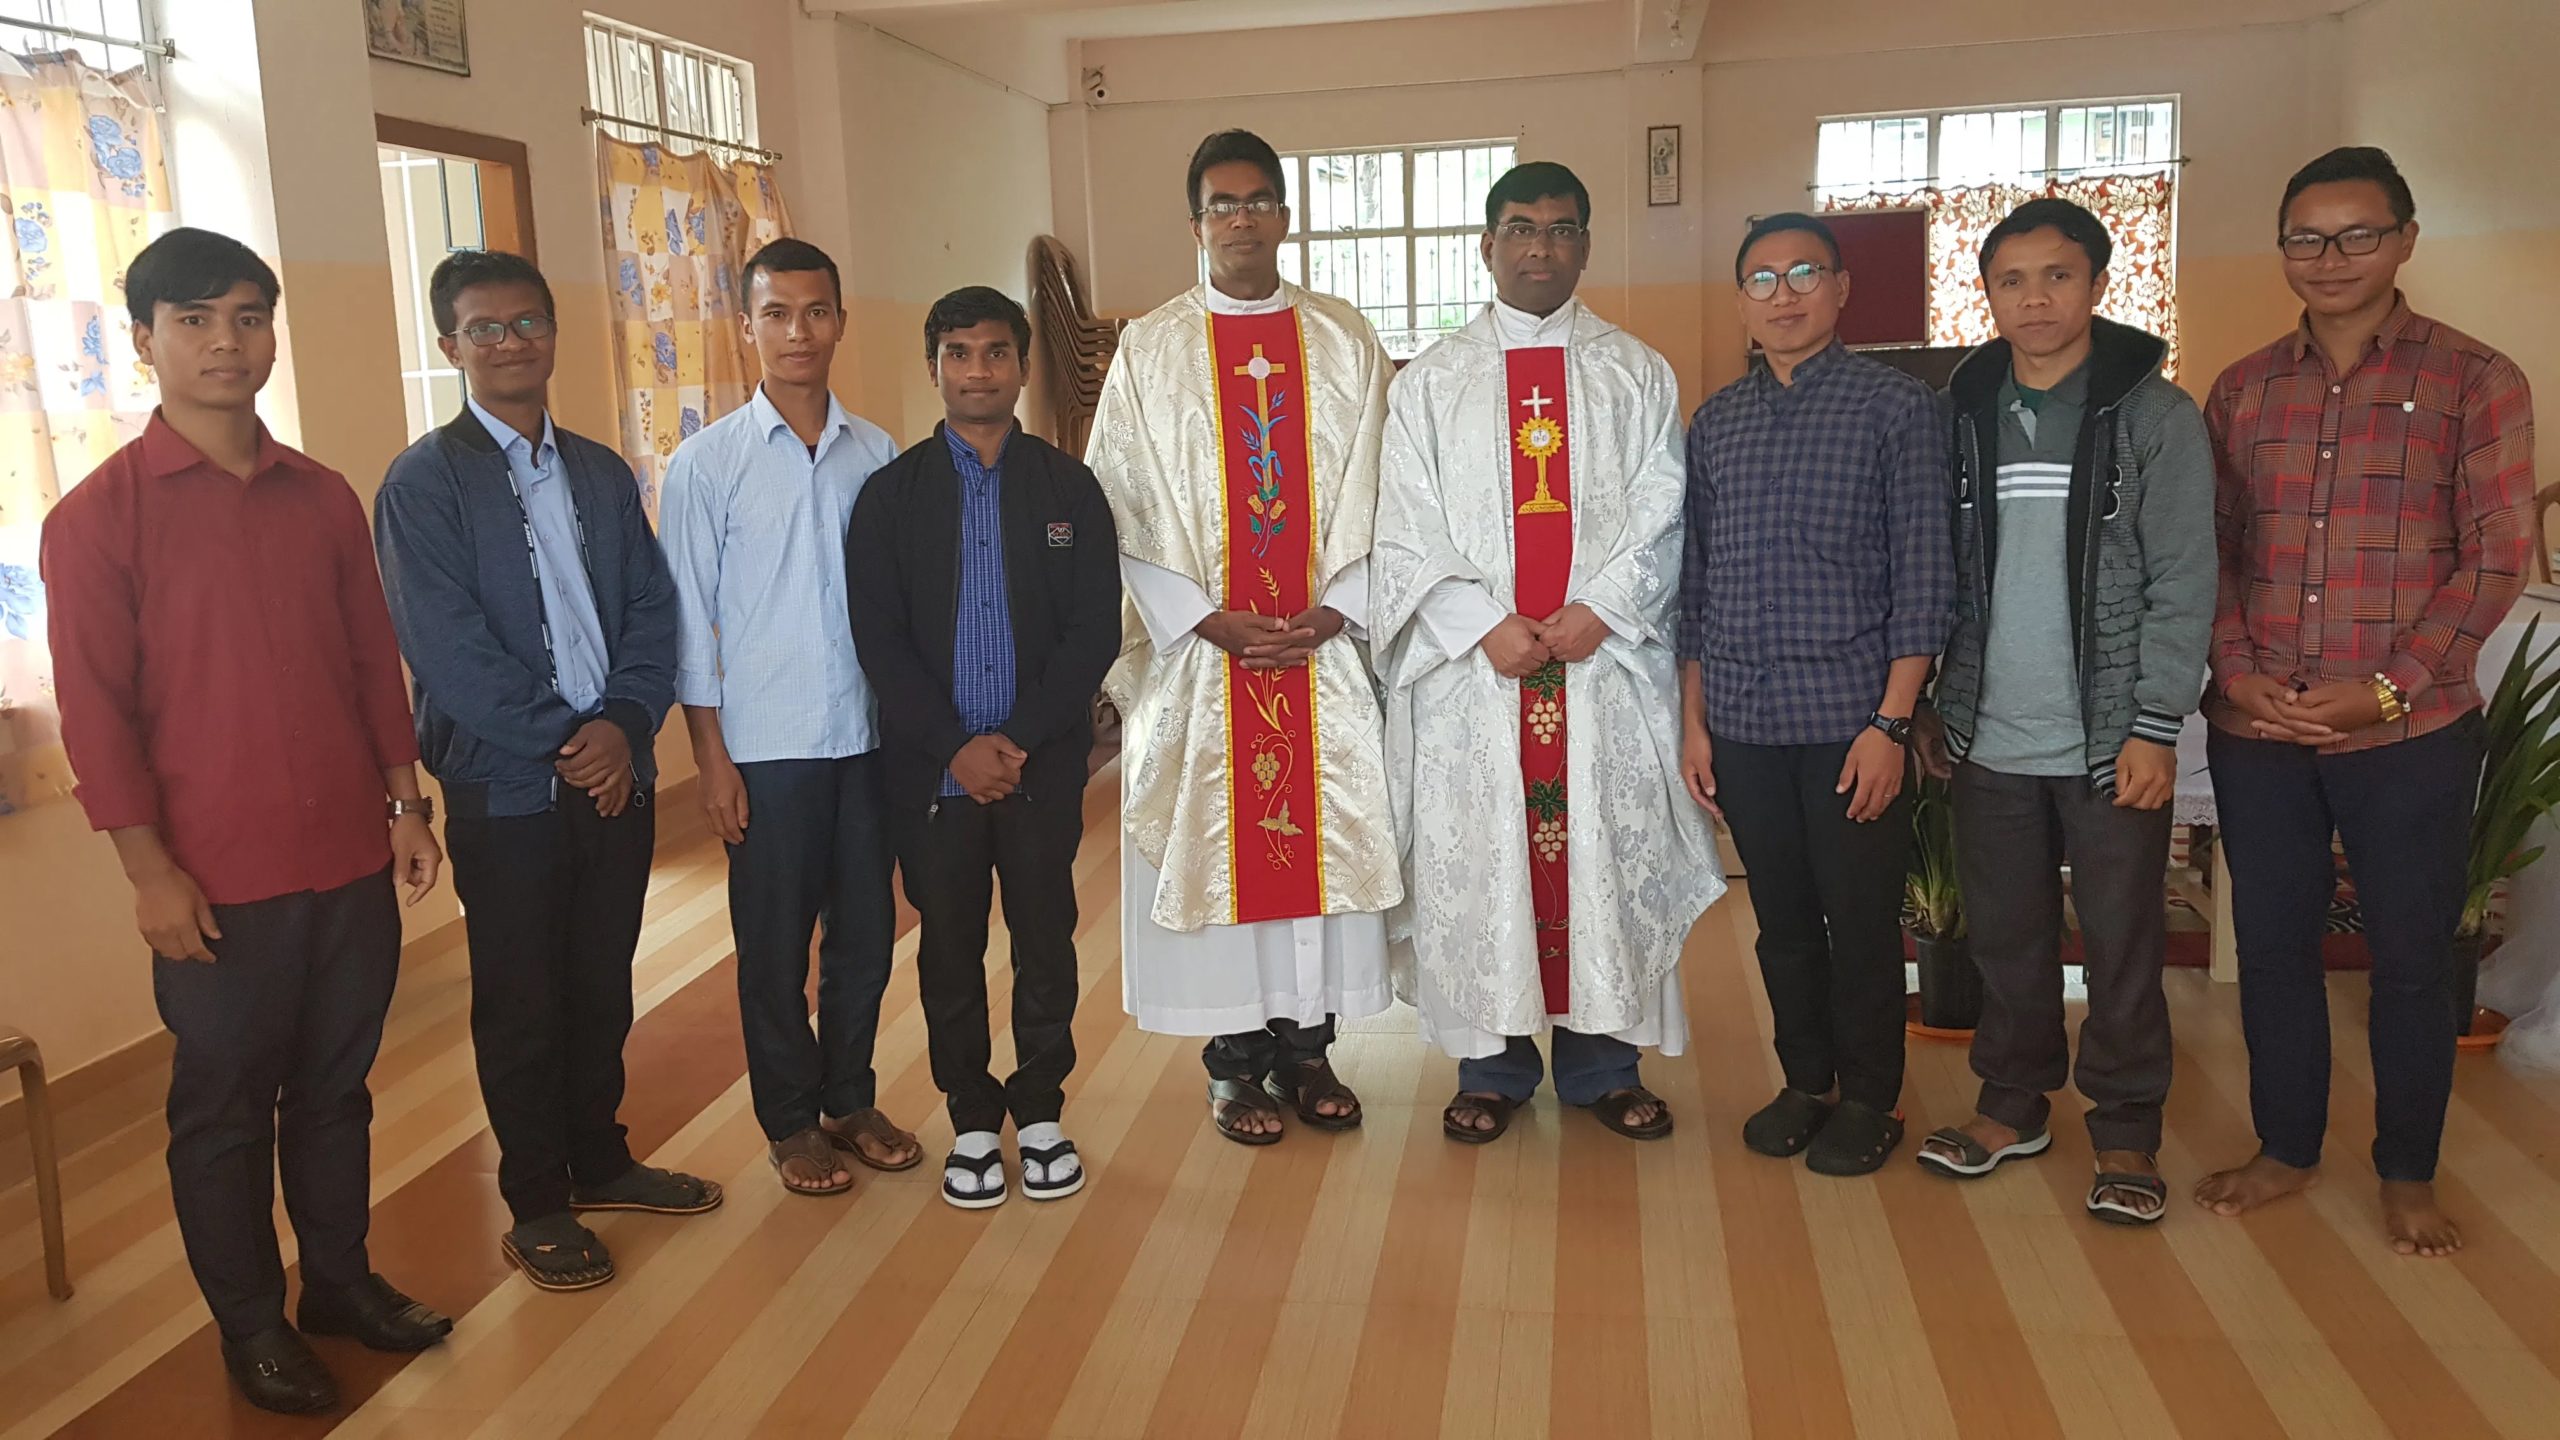 Novitiate Begins at Nongmensong and Professions of Claretian Students of Northeast India Delegation During the Time of Pandemic